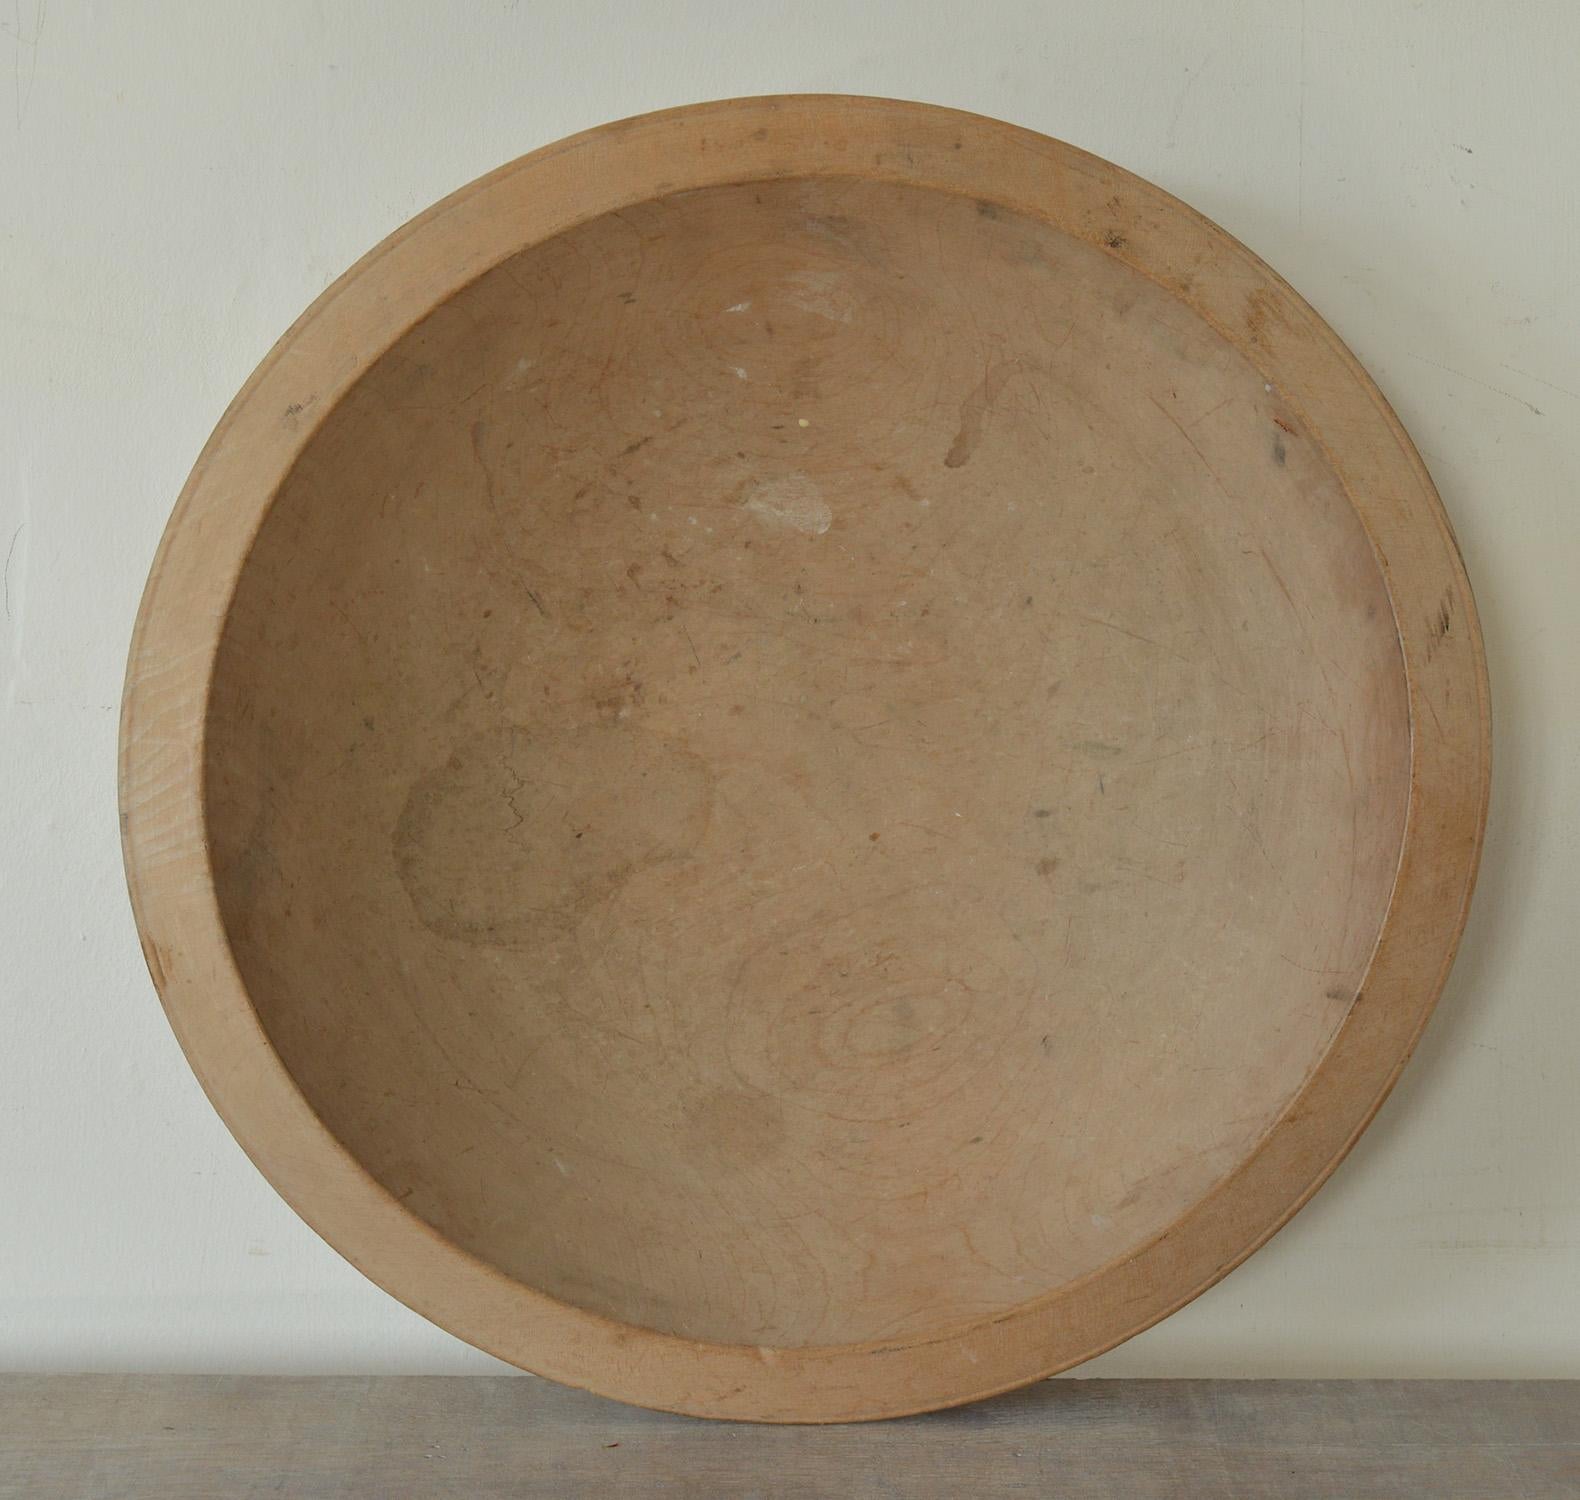 Turned Large Antique Sycamore Dairy Bowl, English, 18th Century